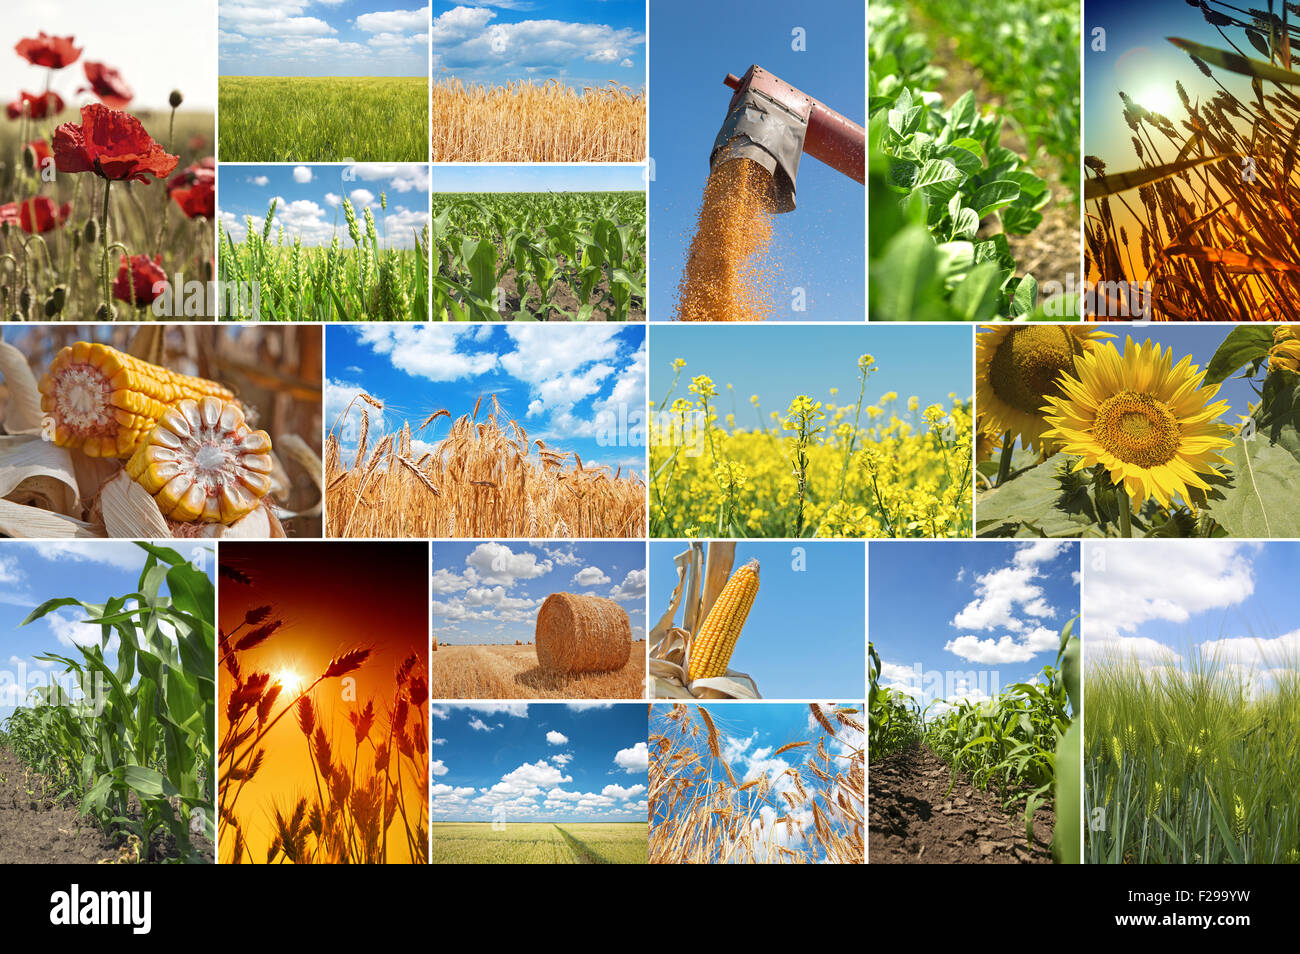 Collage with pictures about agriculture Stock Photo